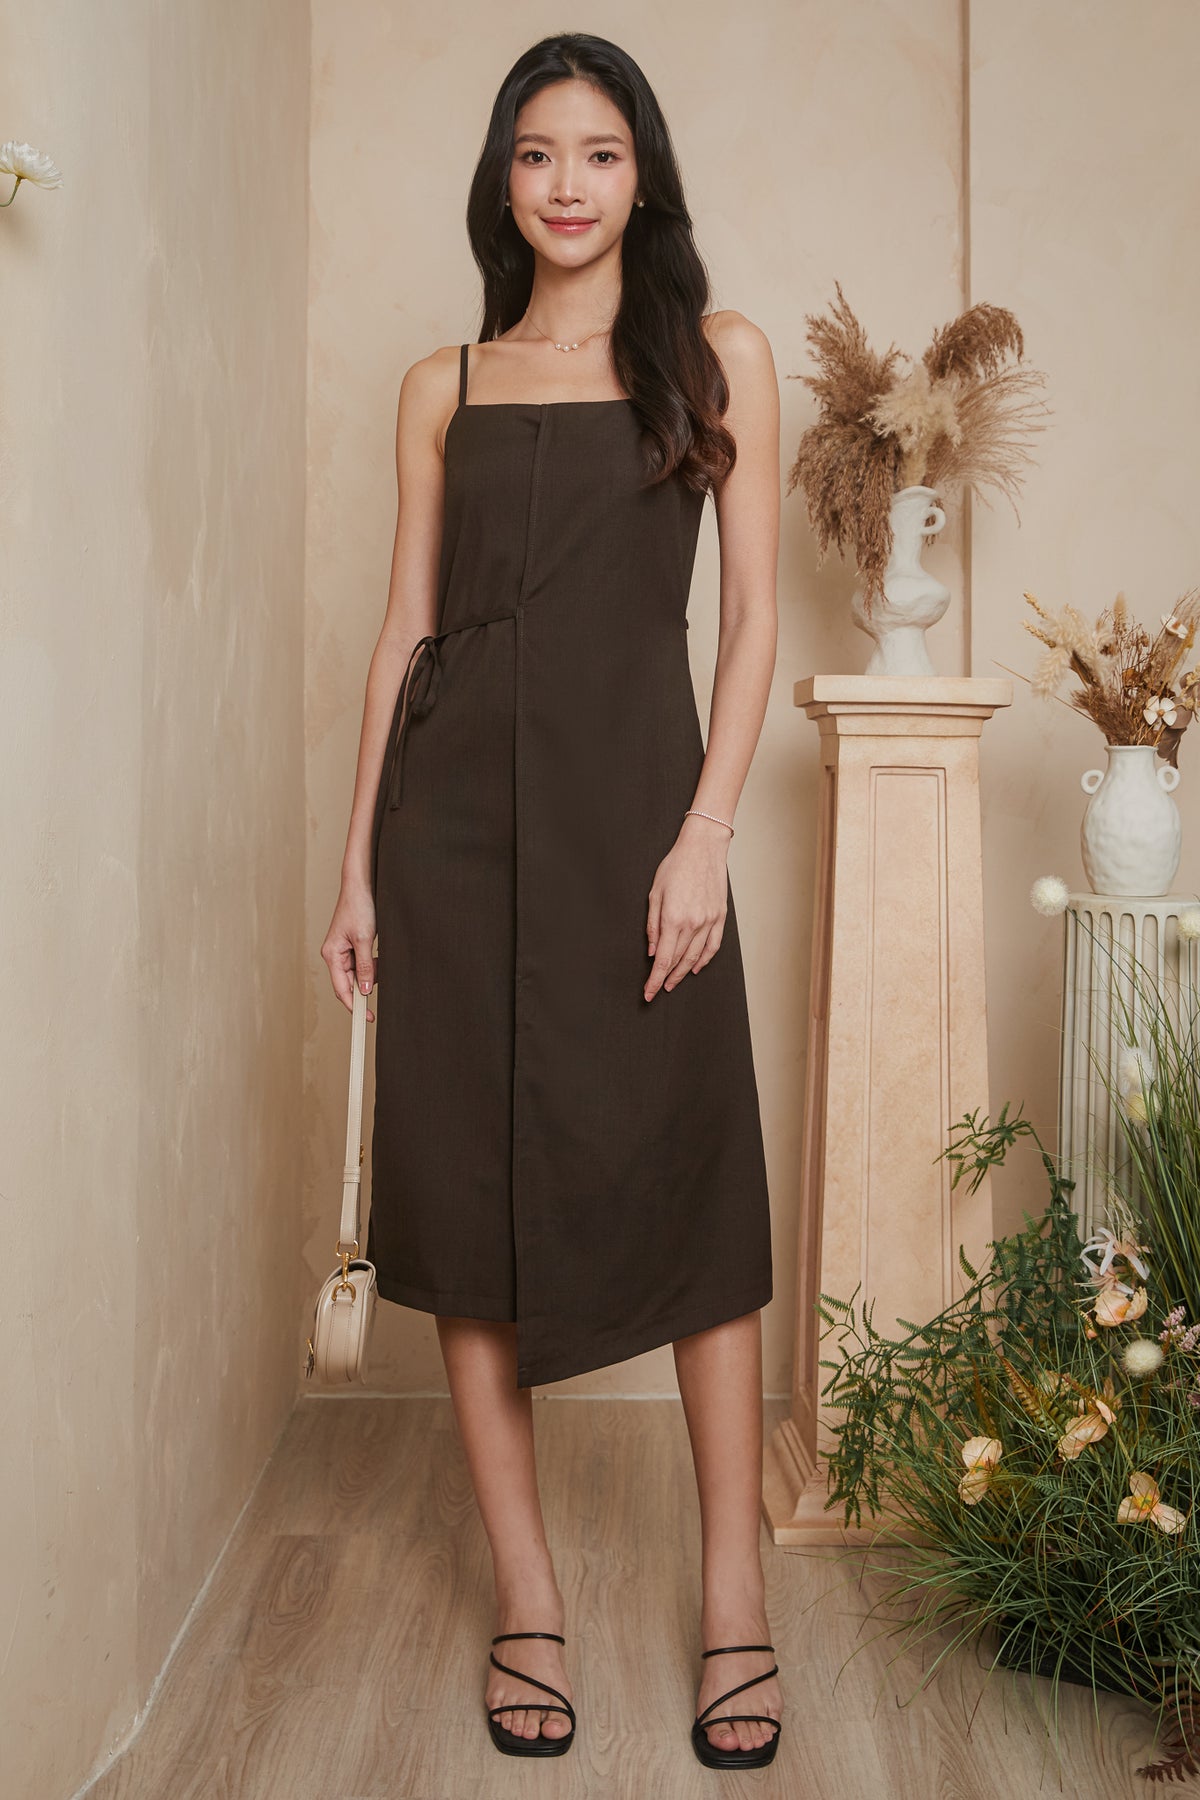 [VGY] Strappy Overlay Wrap Dress in Cocoa